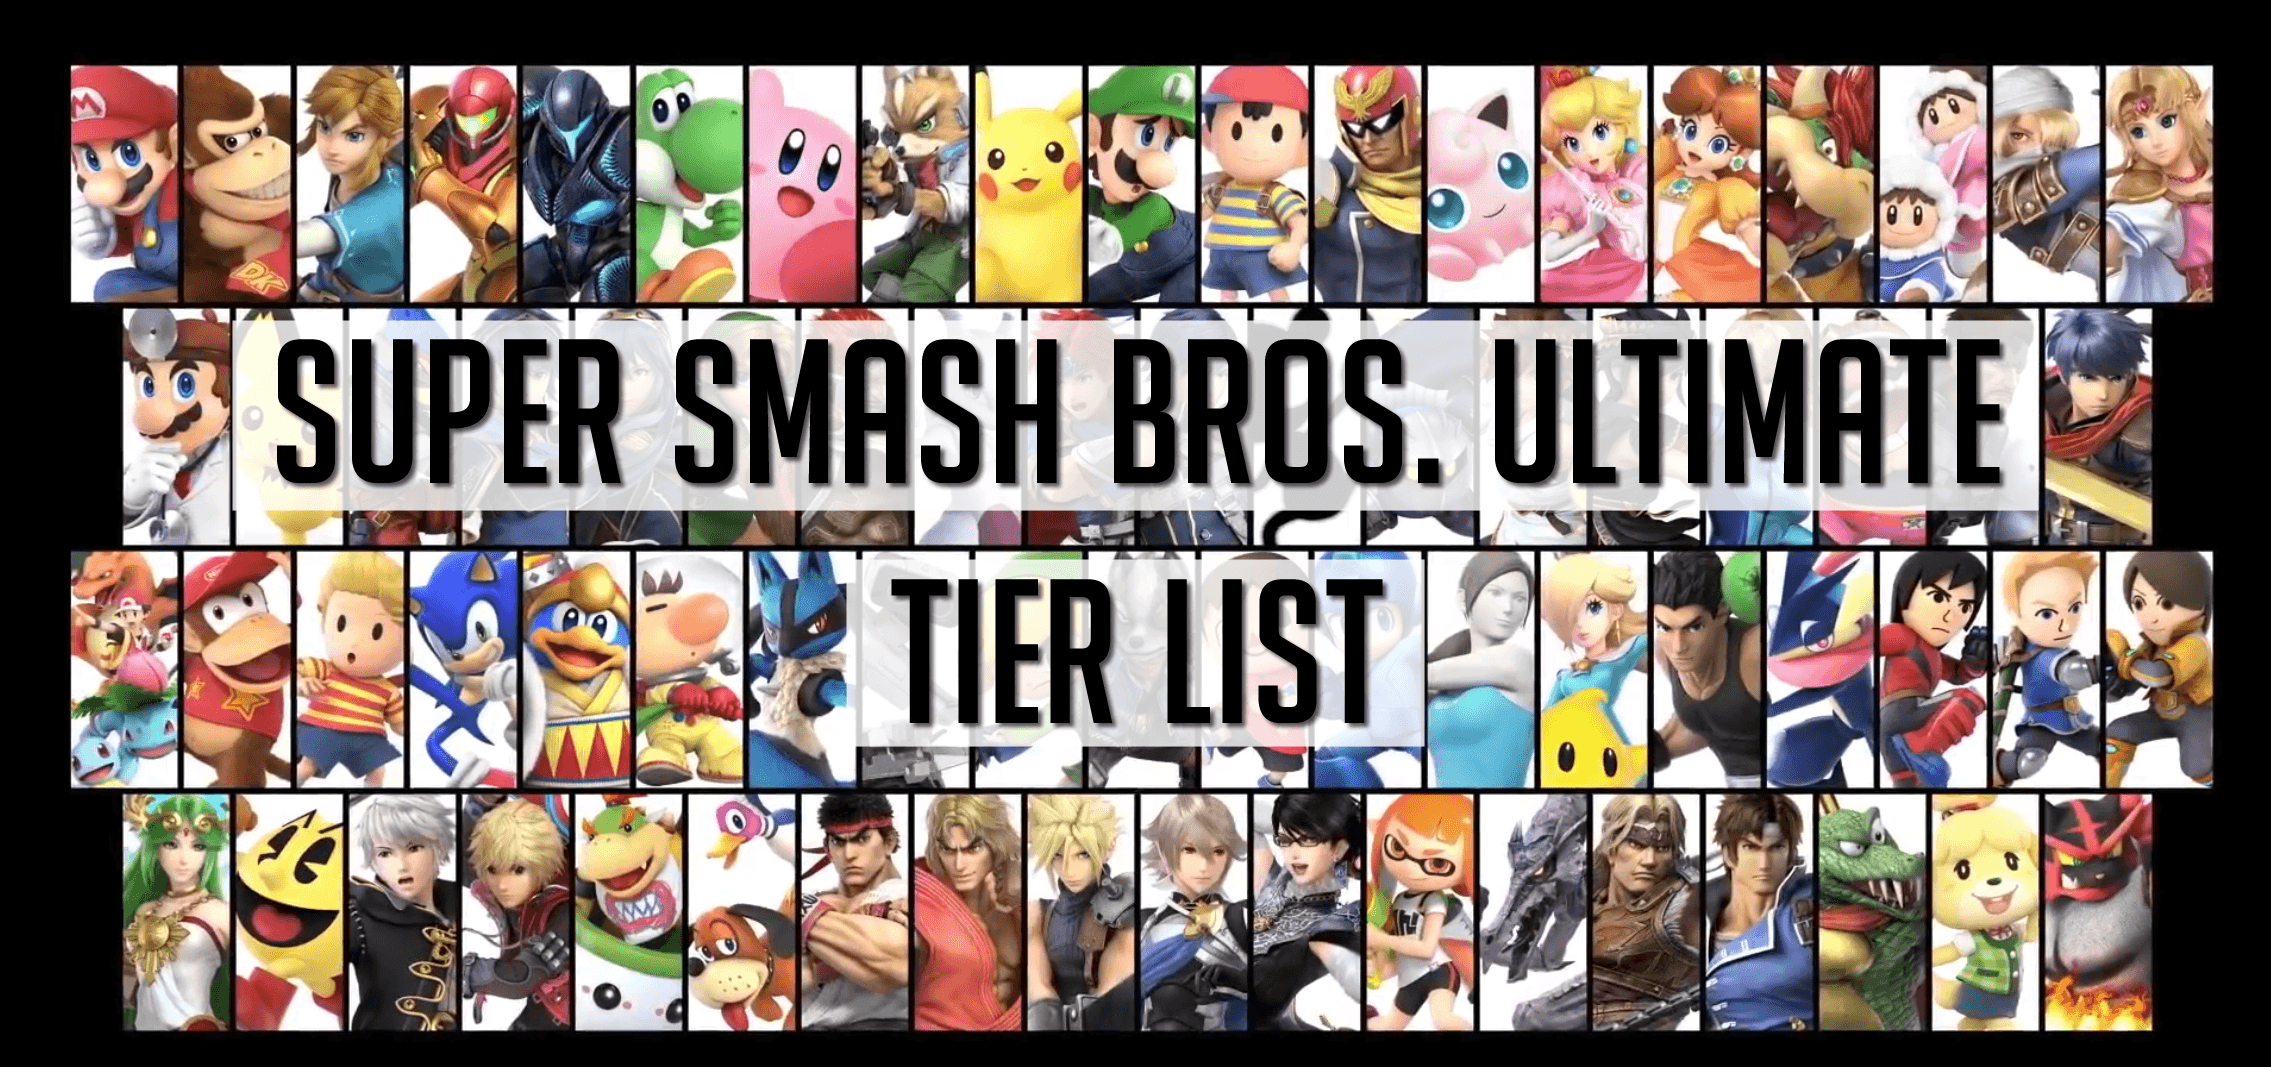 Super Smash Bros Ultimate Tiers by Pro Players | GameGuideHQ